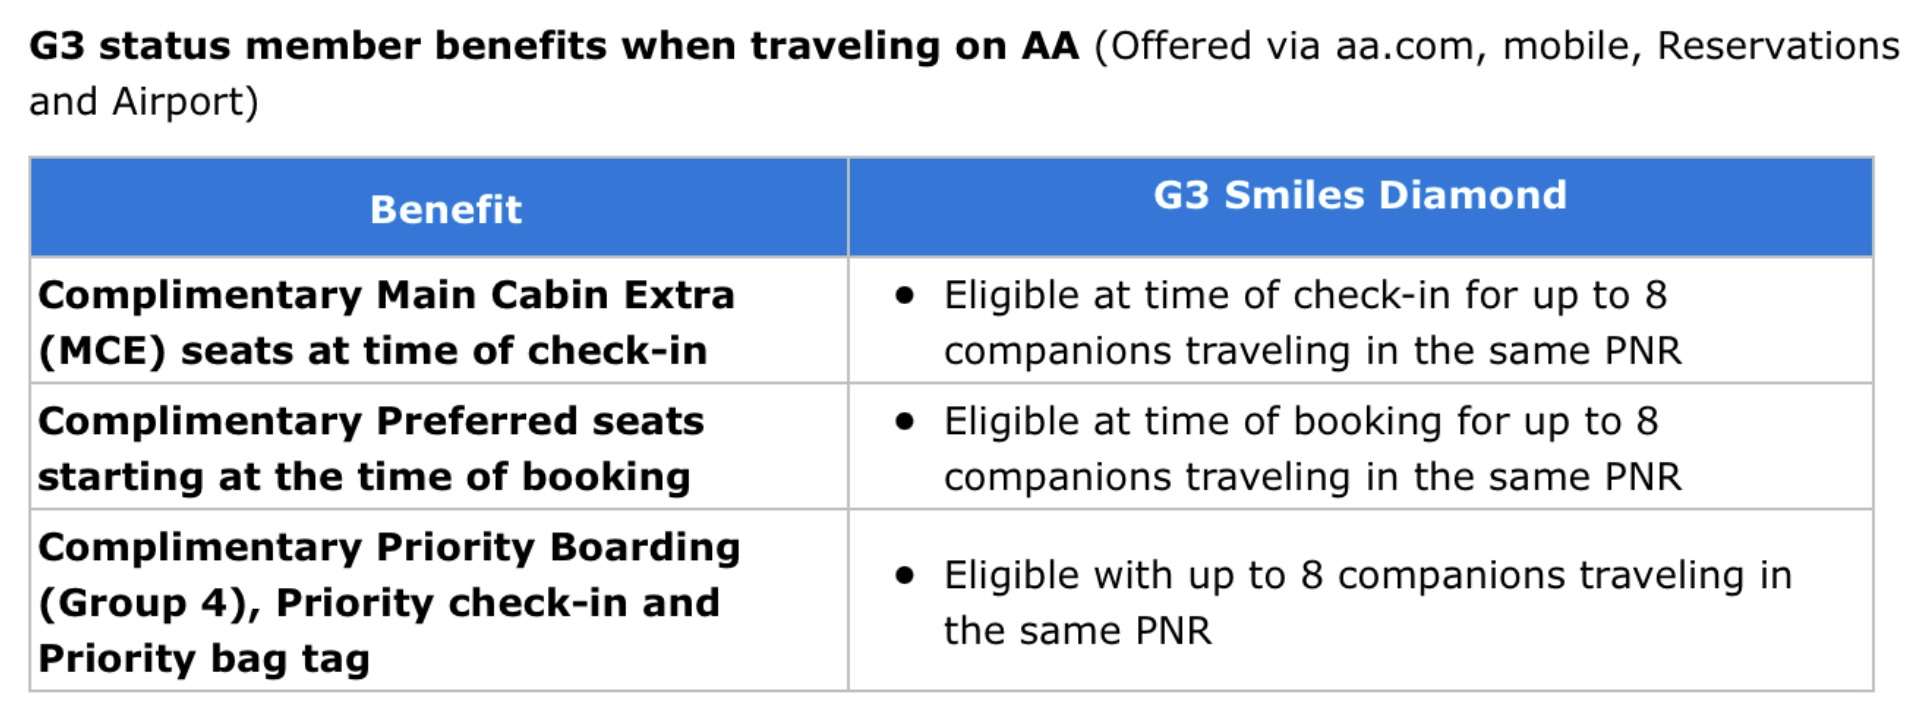 American Airlines Elites Now Receive Status Benefits When Flying Gol gol elites on aa